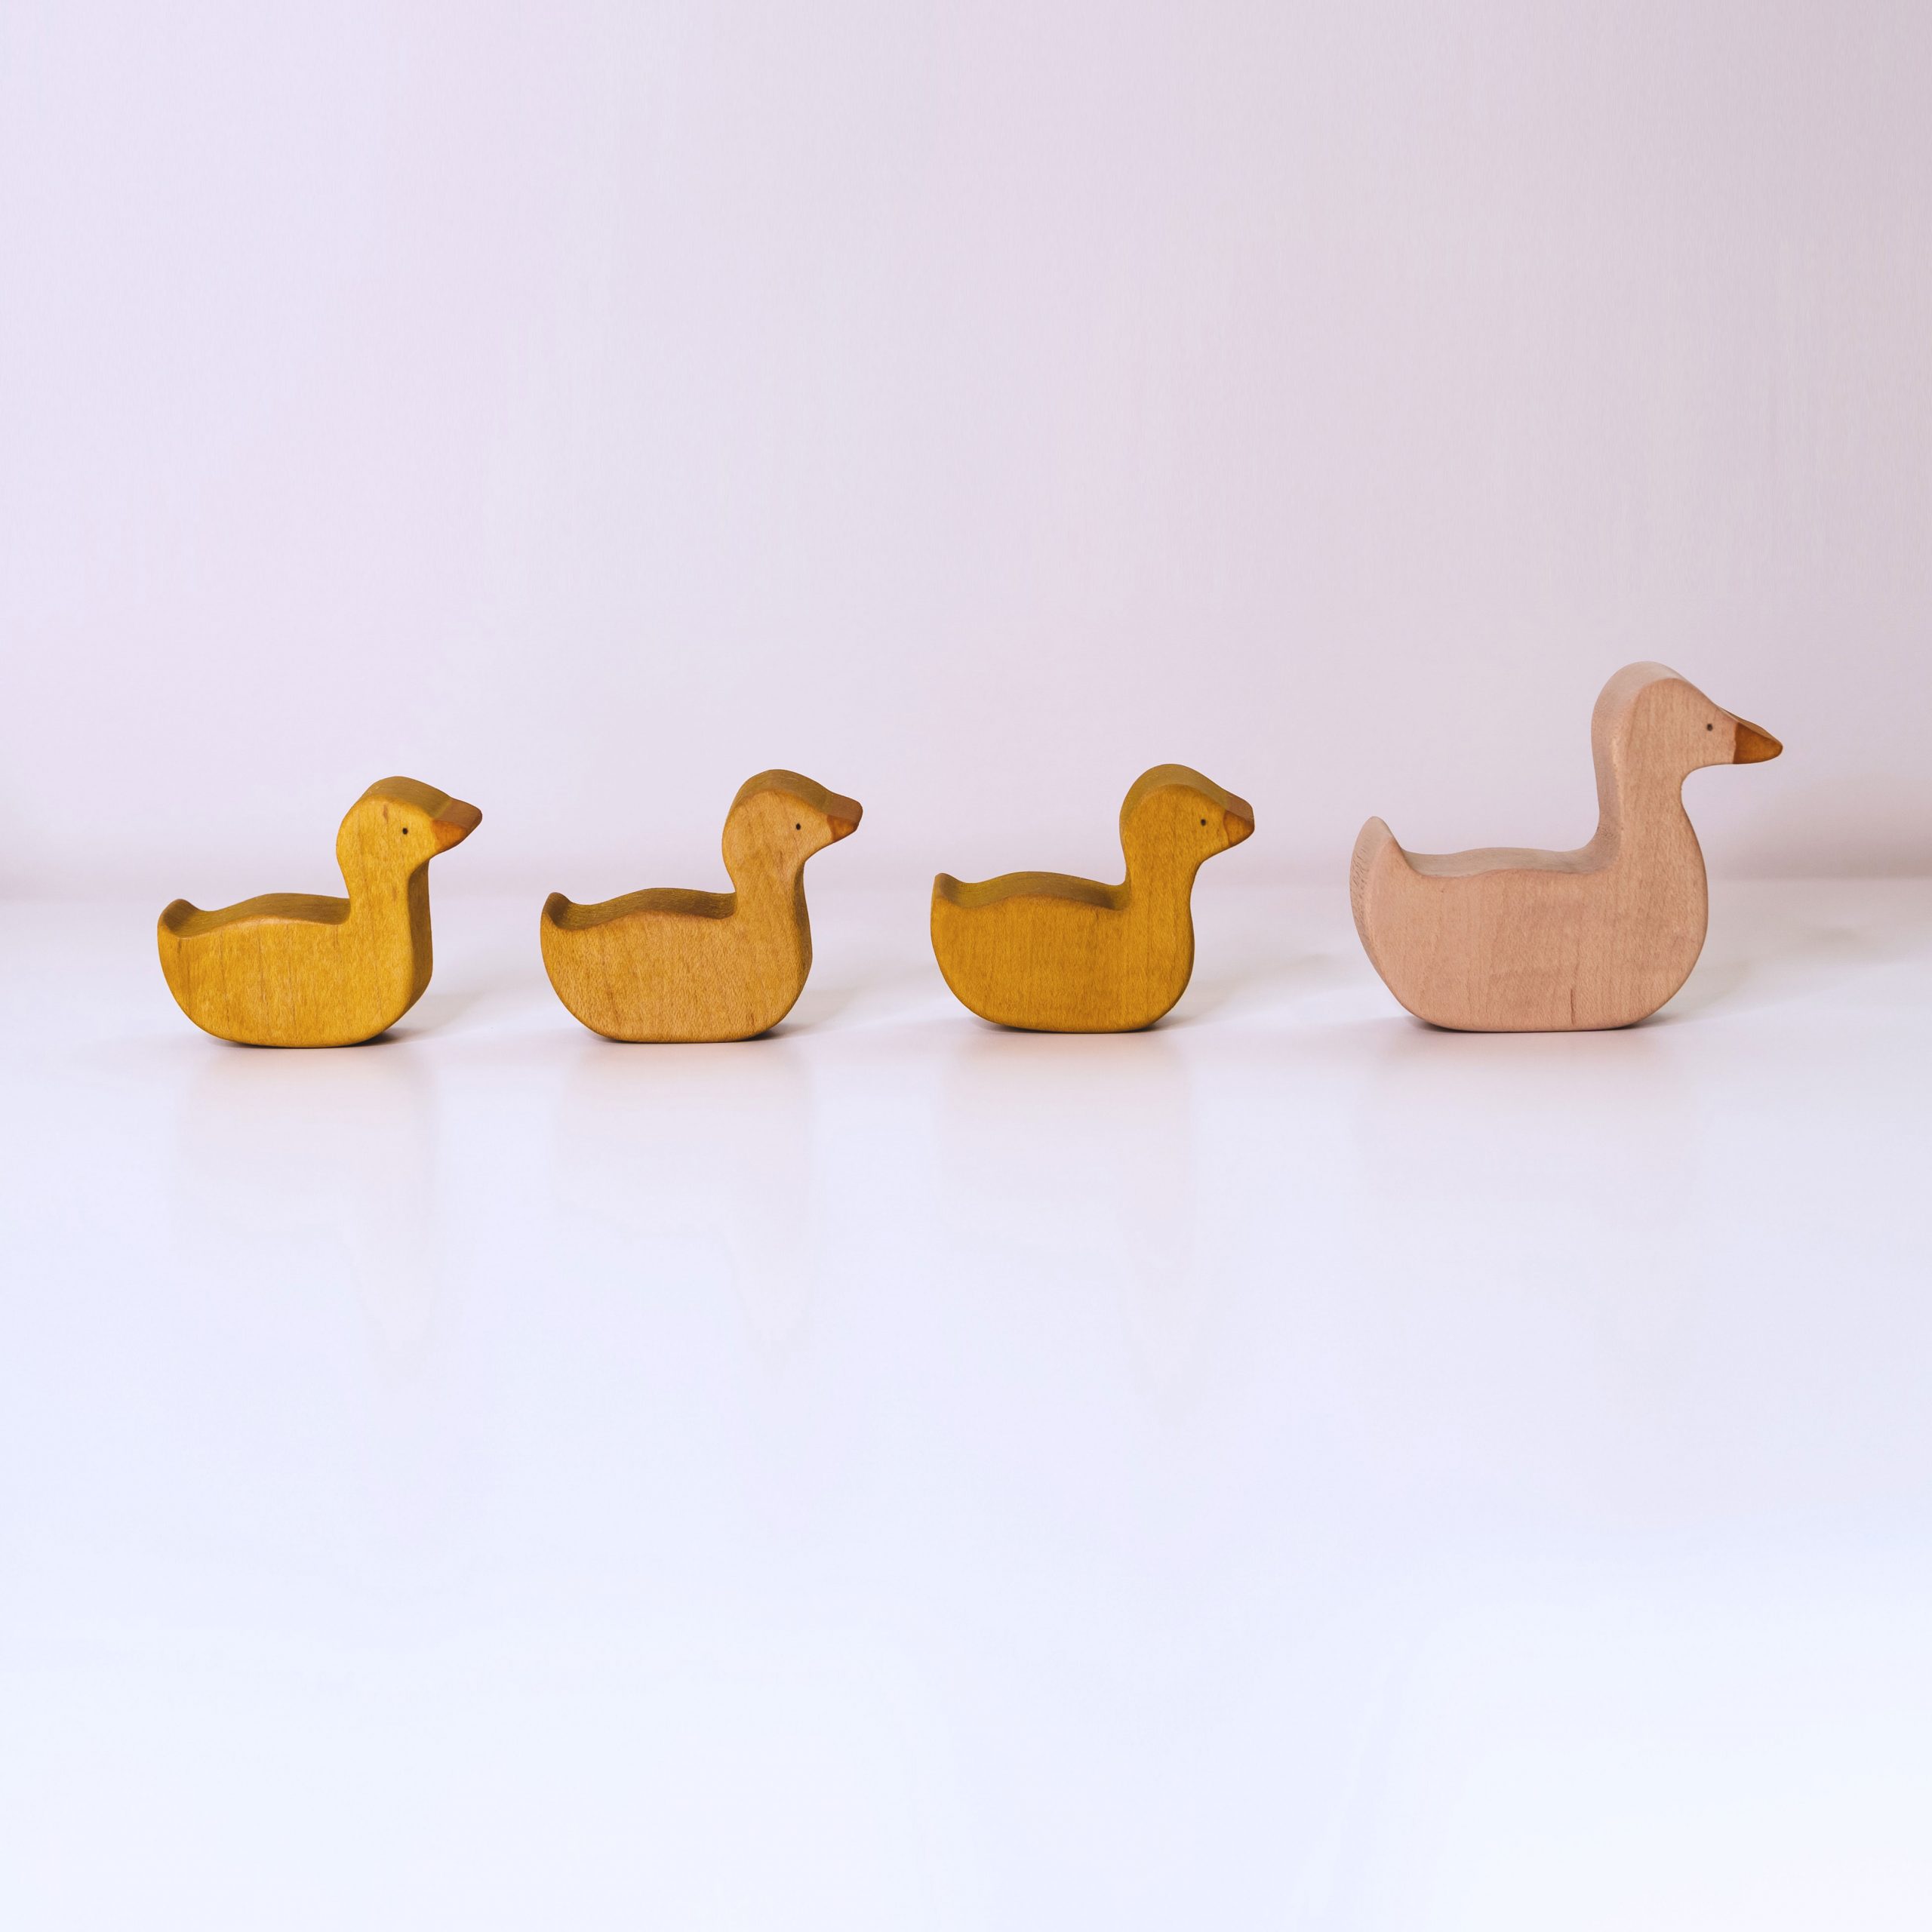 duck family maple_small